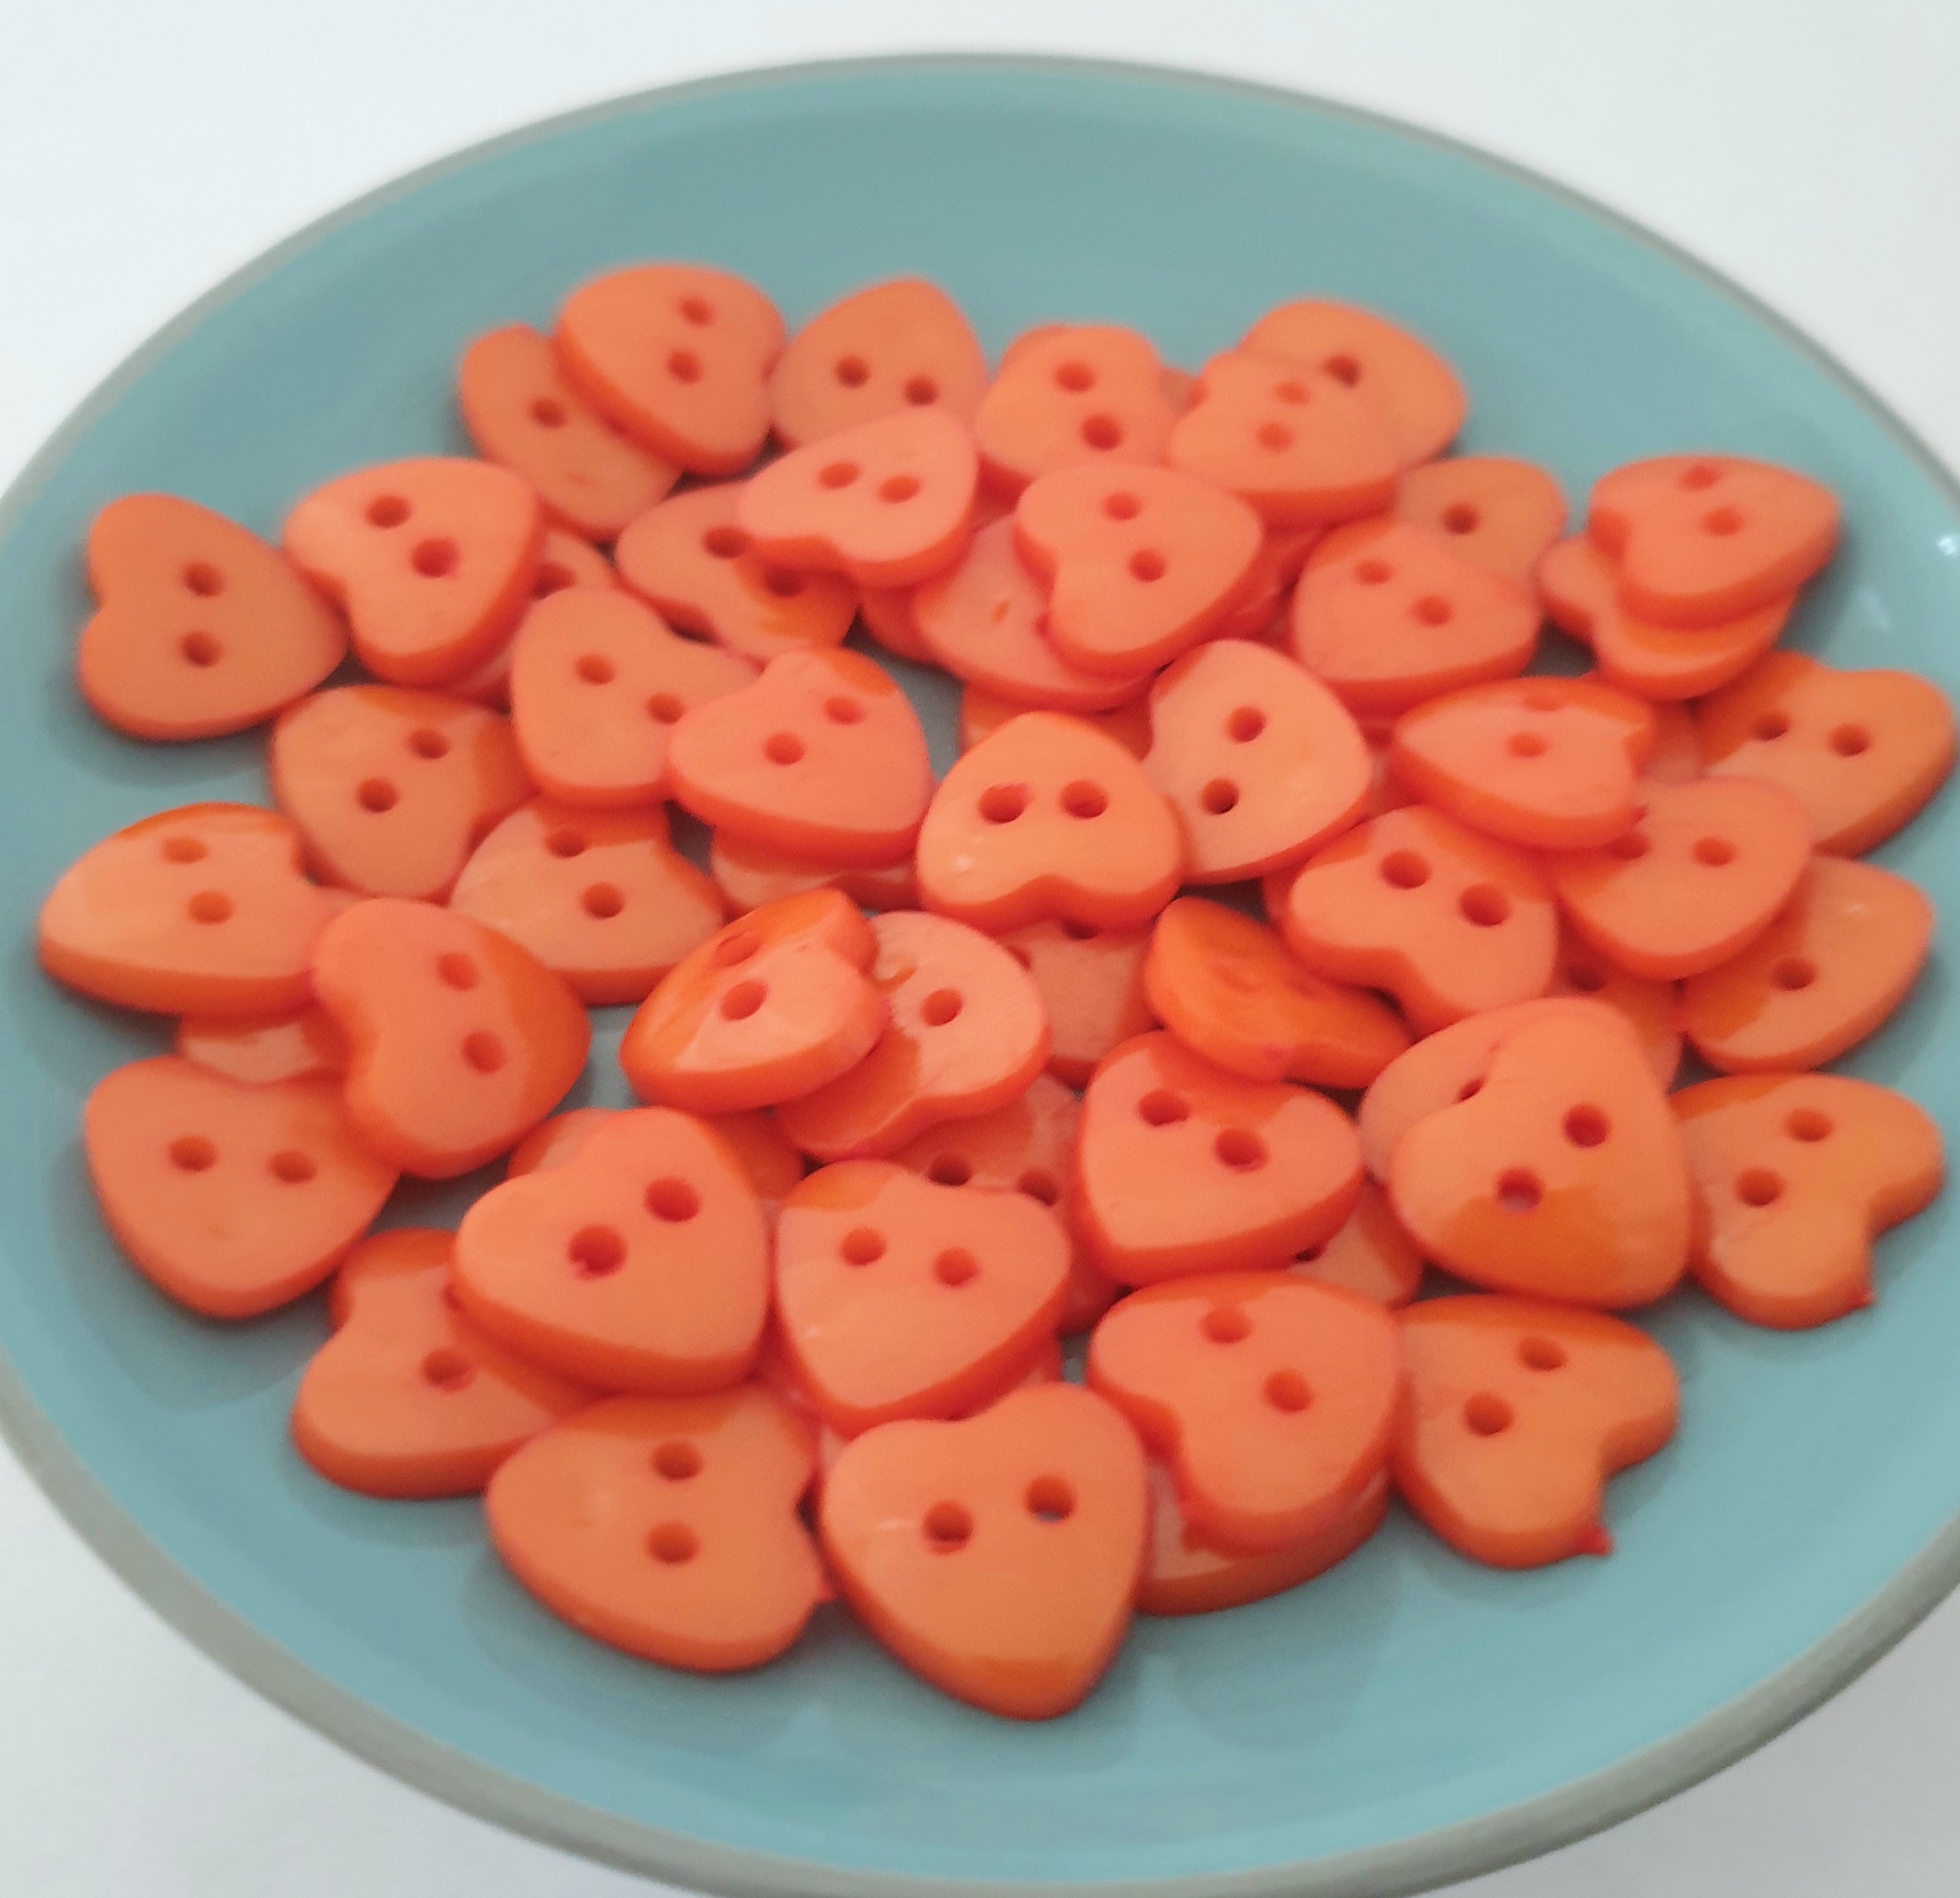 MajorCrafts 60pcs 13mm Orange Heart Shaped 2 Holes Resin Sewing Buttons